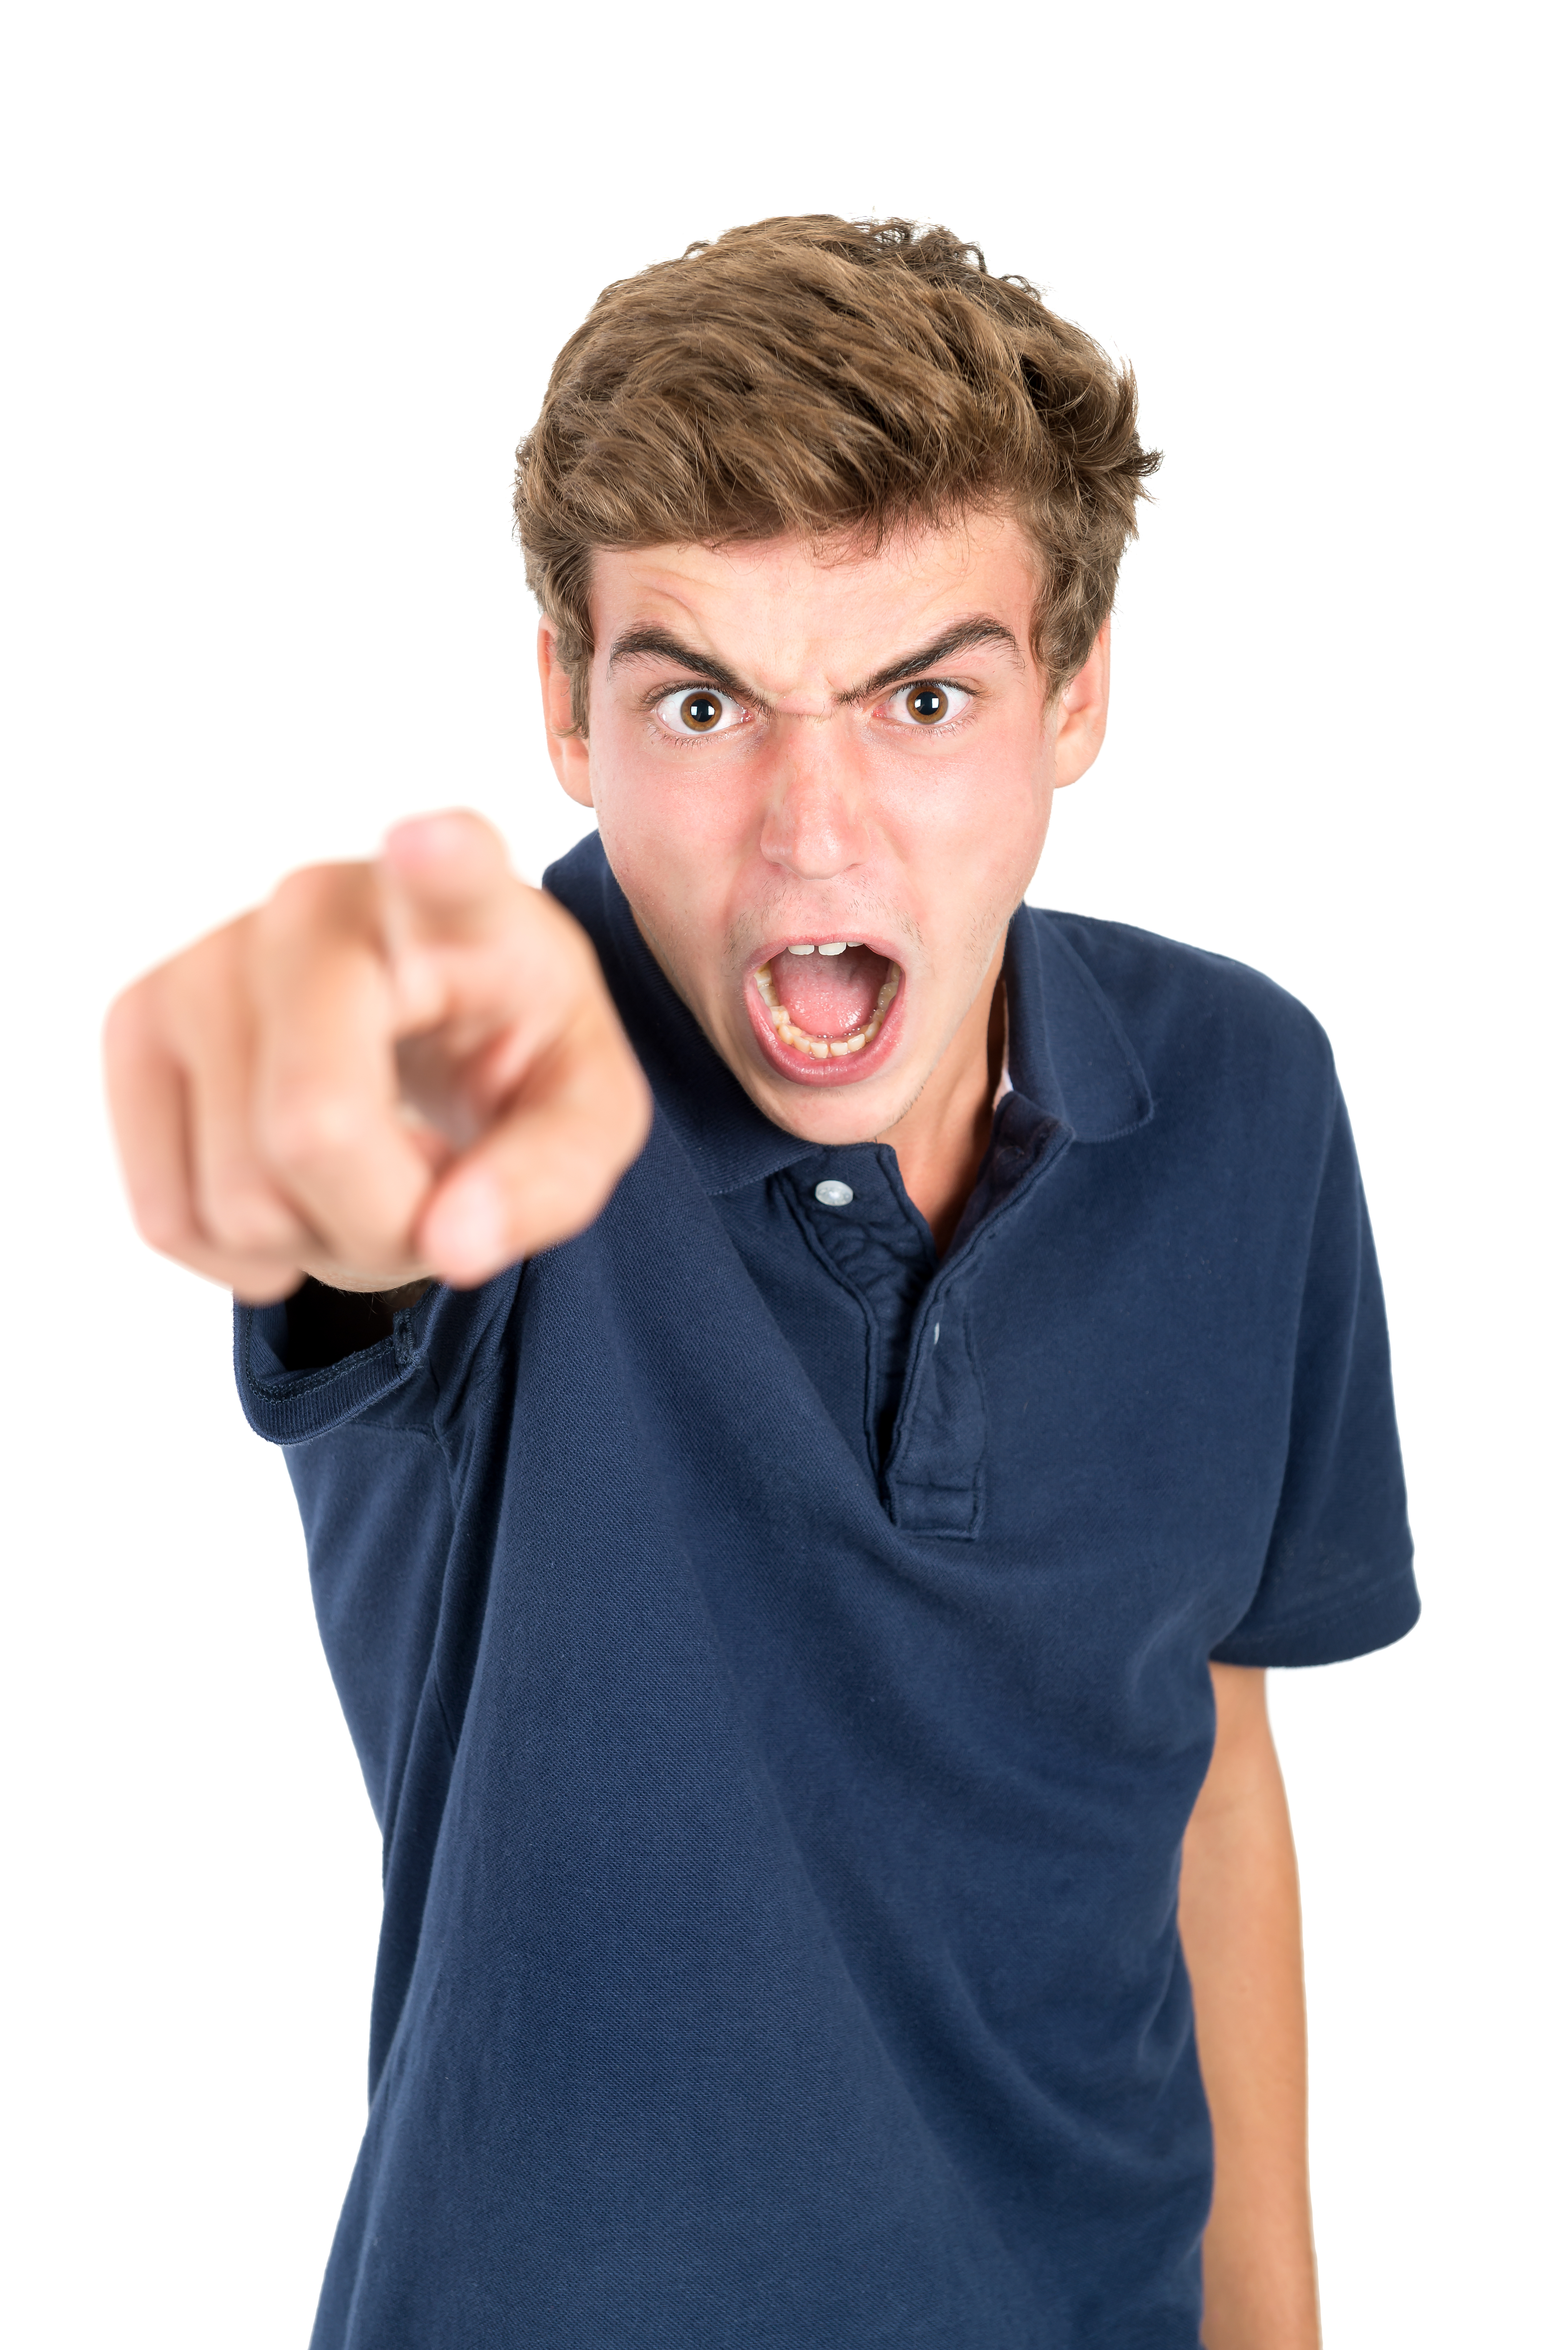 An angry young man pointing and yelling | Source: Shutterstock